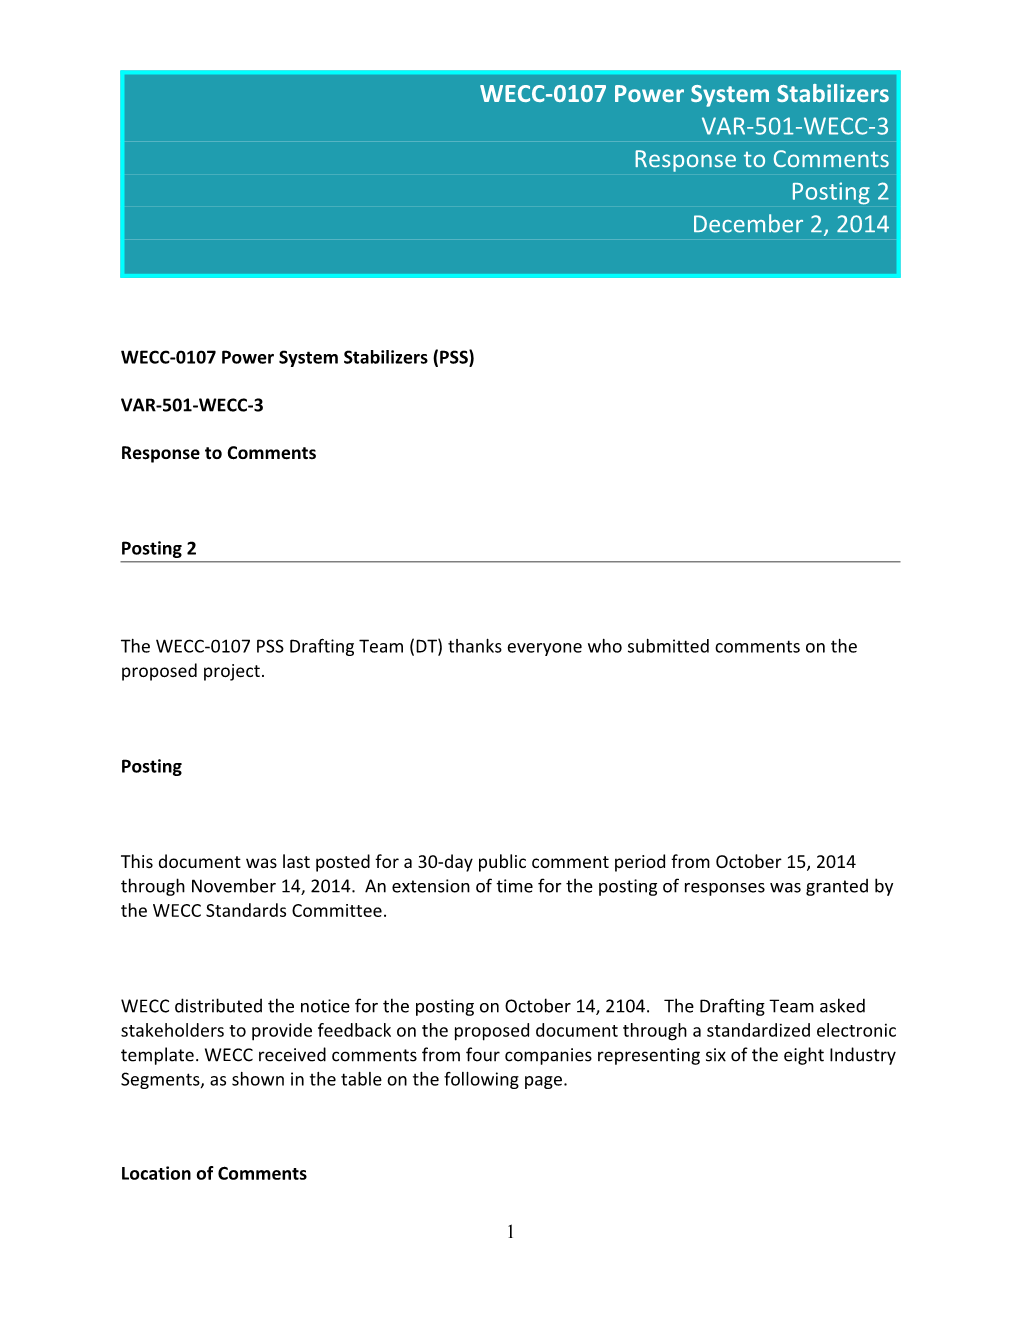 WECC-0107 Posting 2 VAR-501-WECC-2 Power System Stabilizers Response to Comments 12-2-2014